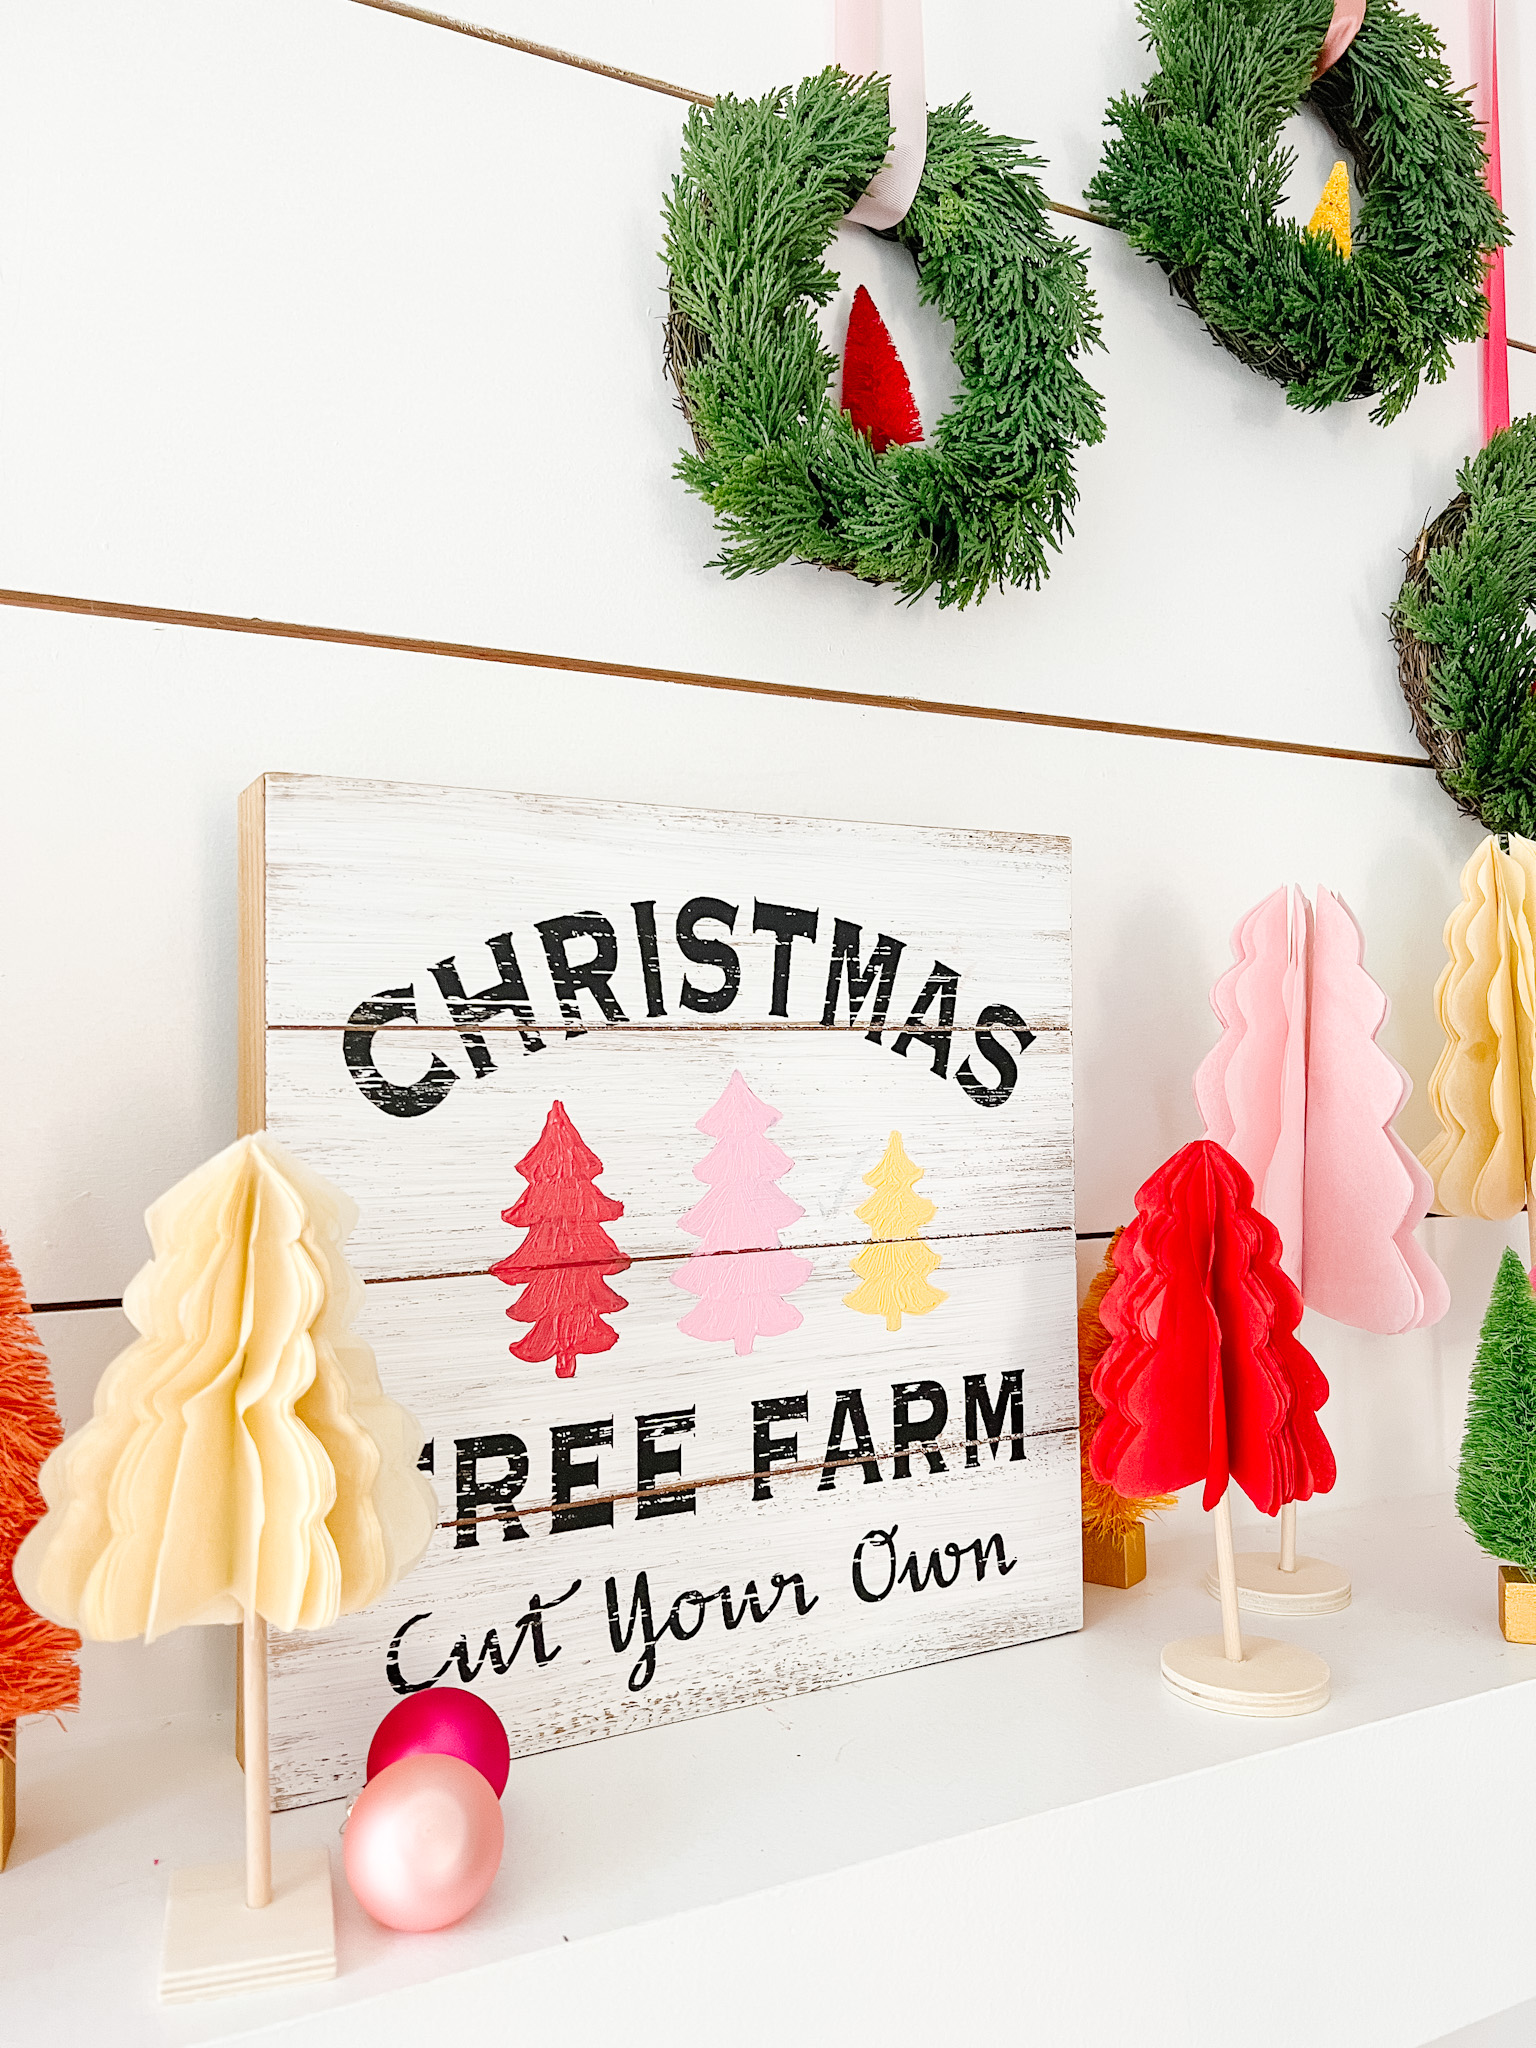 DIY Tissue Paper Holiday Trees. Add some color to your mantel or shelf by making these easy tissue paper trees with free printable templates.